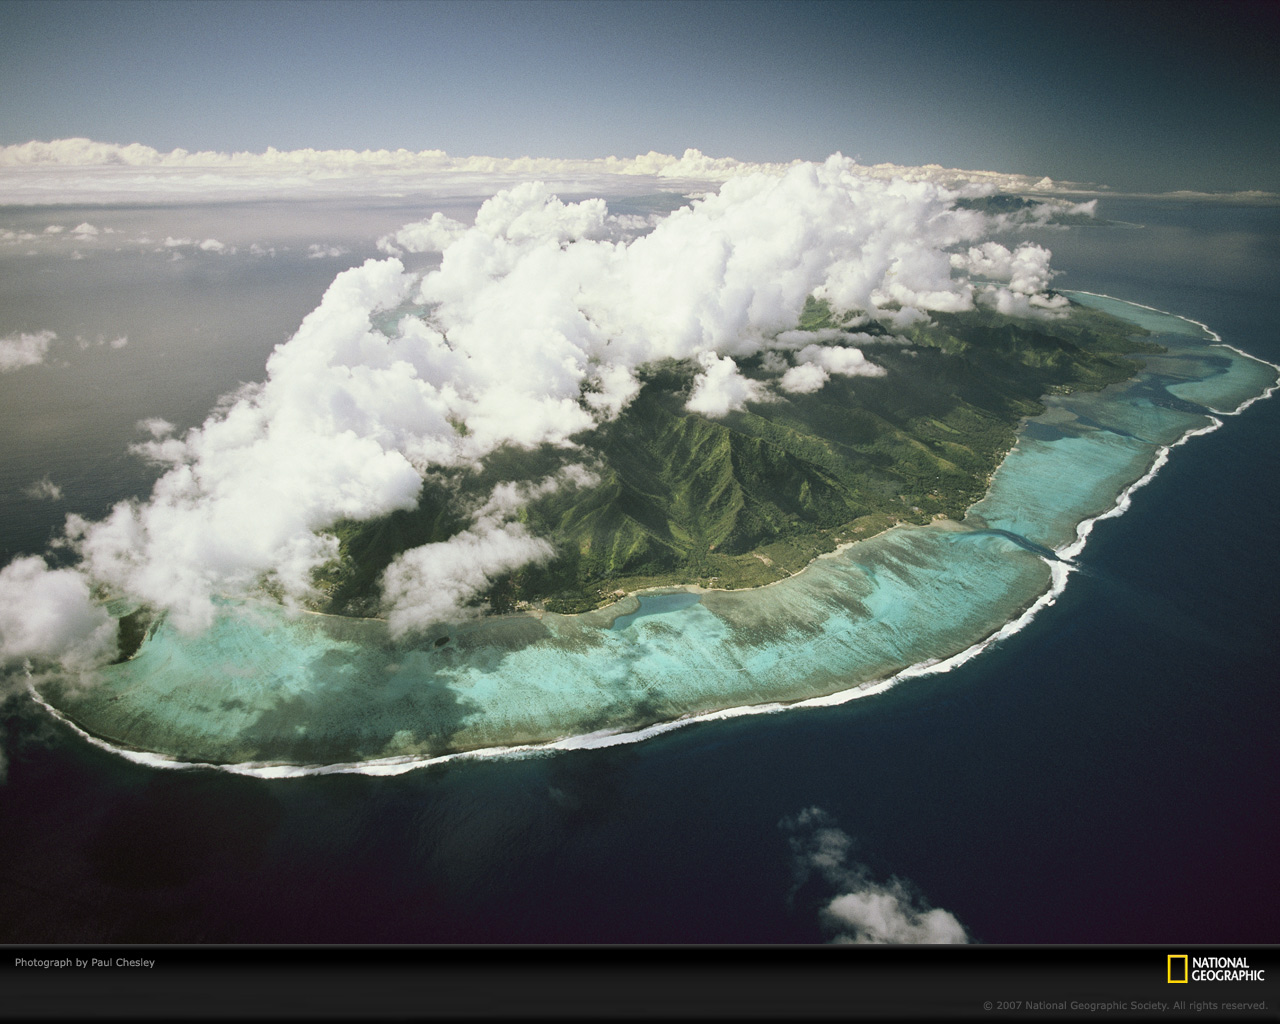  Islands Aerial Photos Download Wallpaper    National Geographic